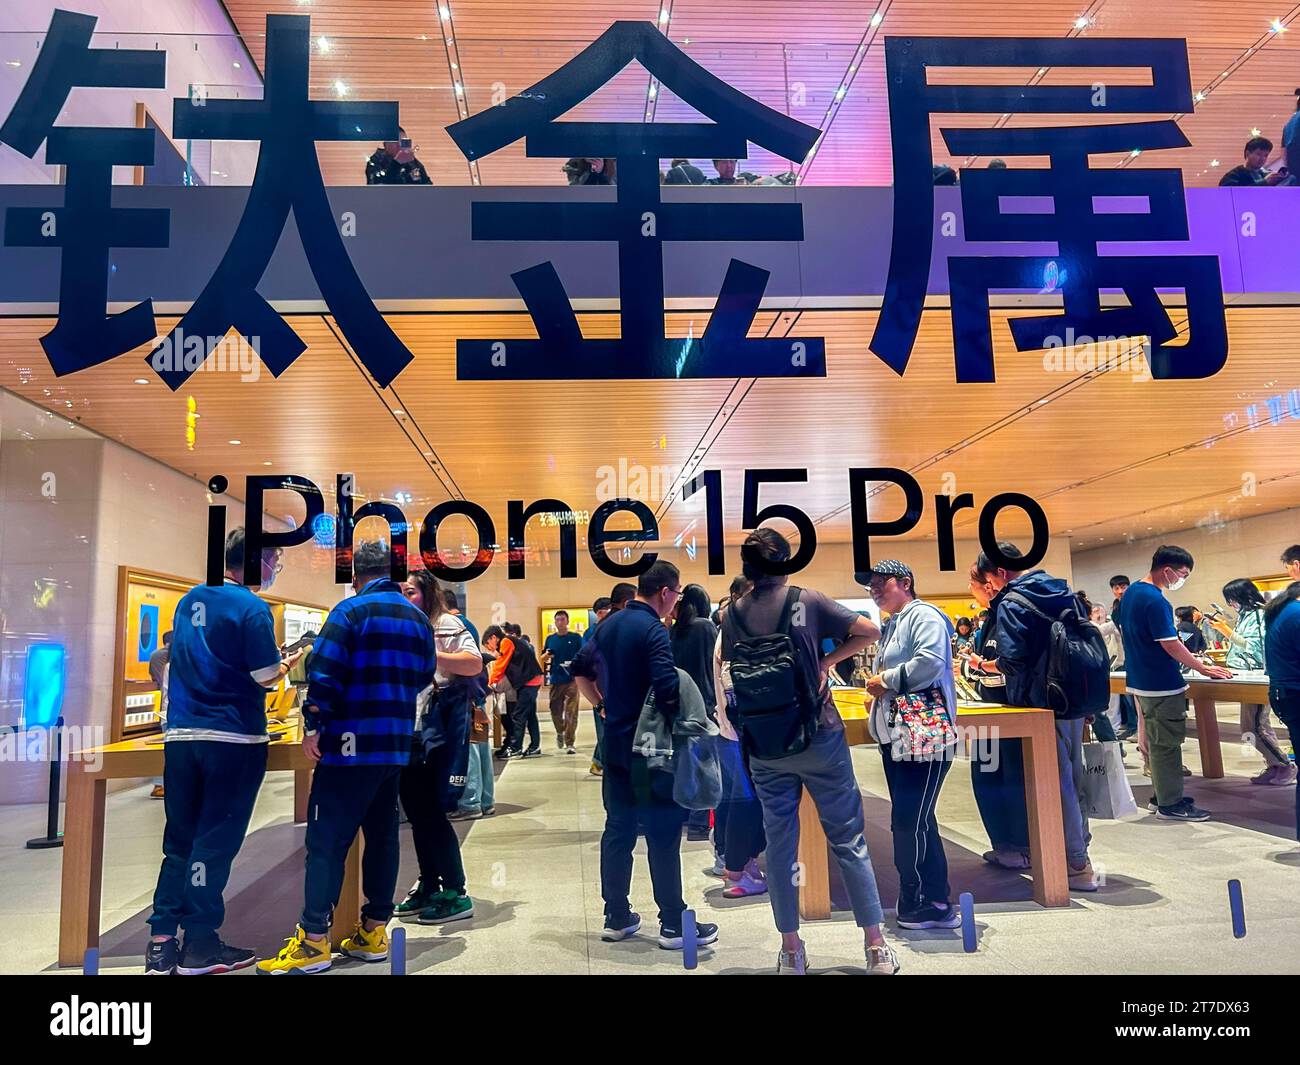 Beijing, China, Crowd of people , inside Apple Store, Sanlitun, sign on shop window, IPhone 15 Pro, china capitalism Stock Photo